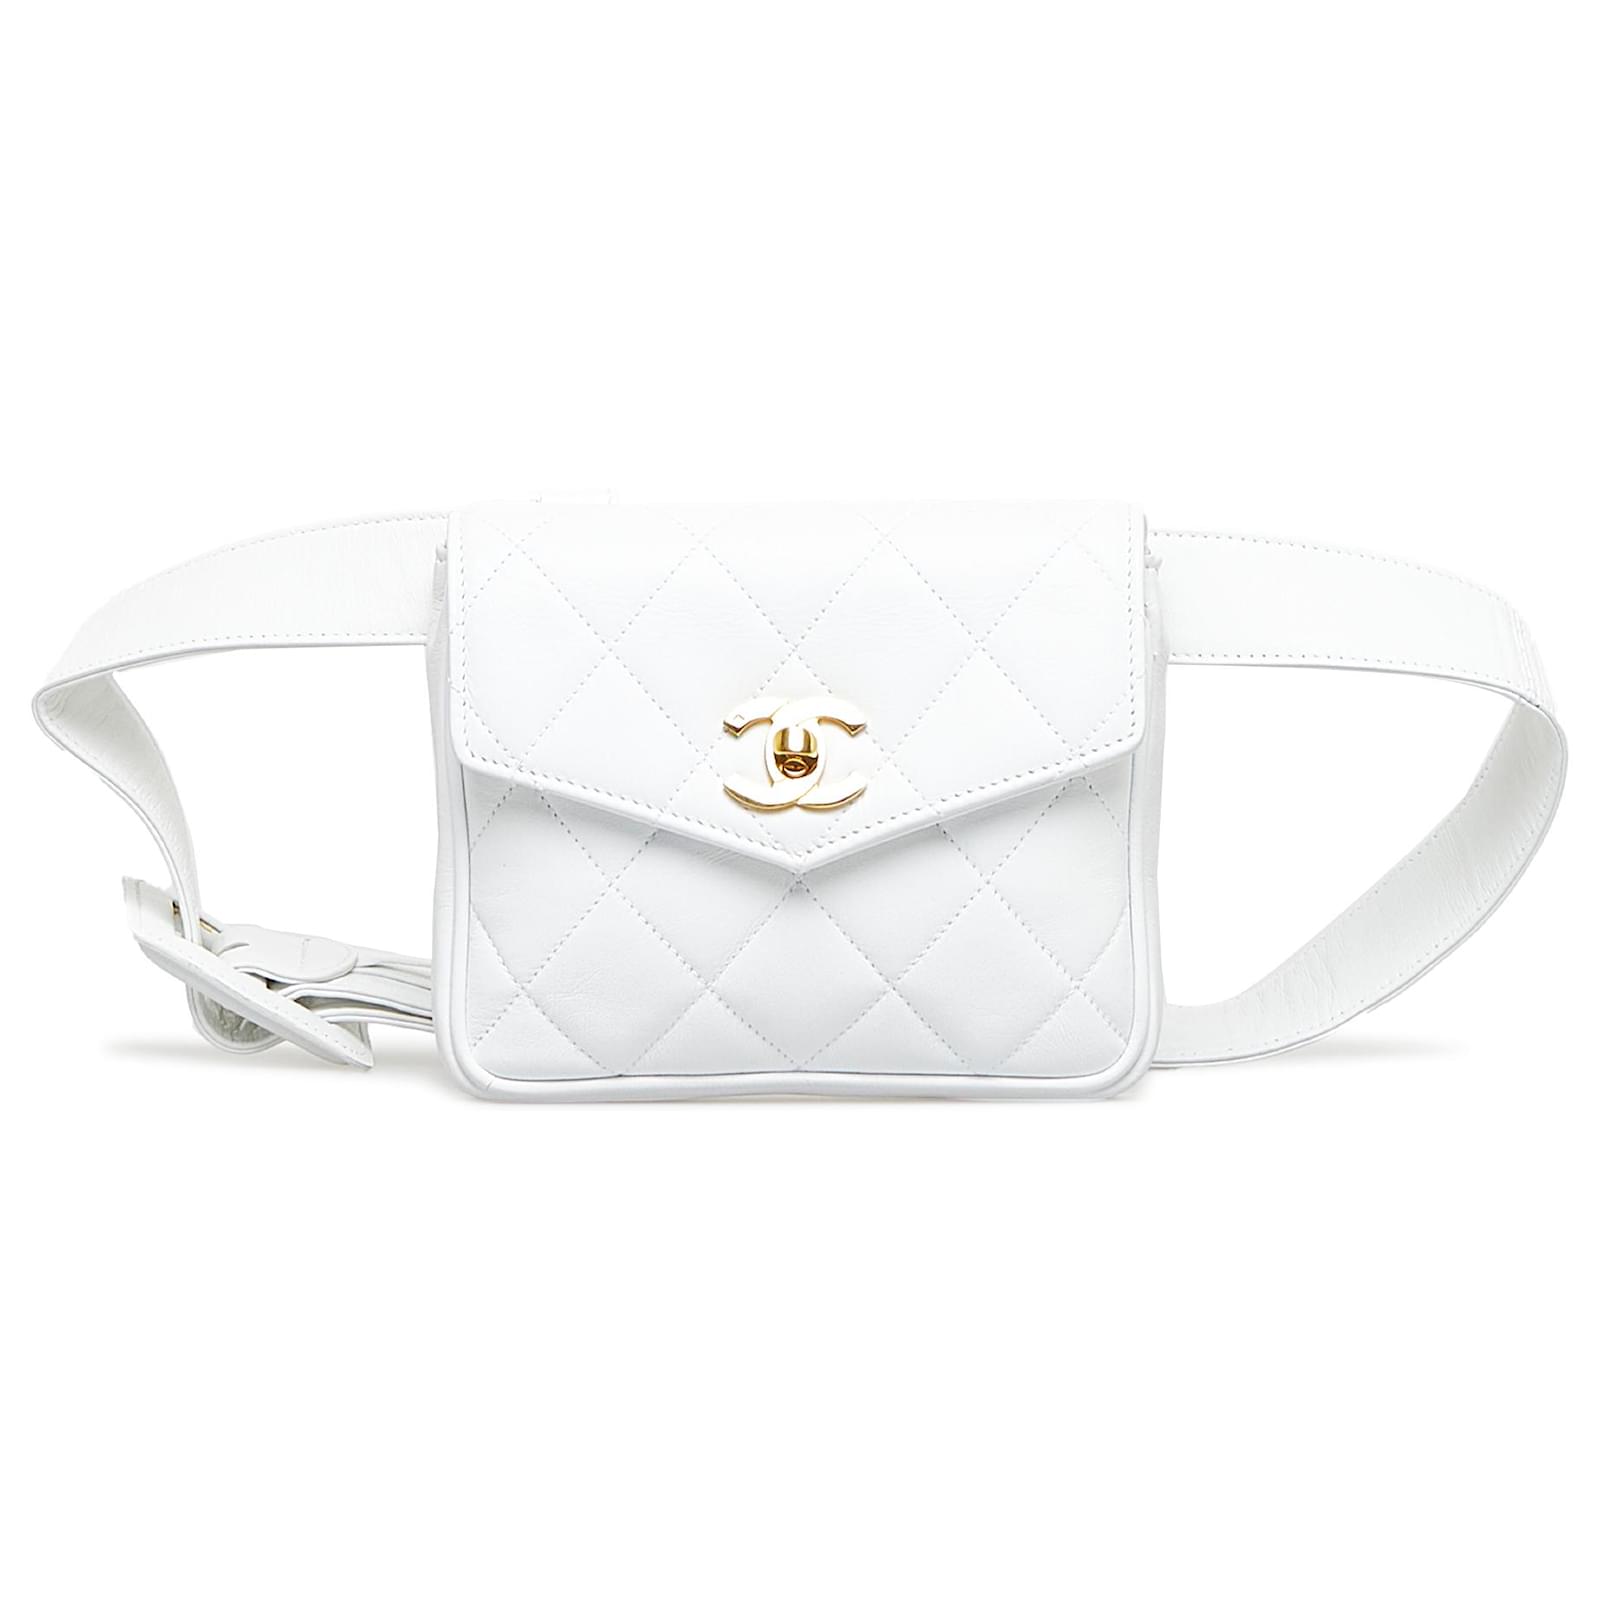 Chanel White Iridescent Calfskin Quilted All About Waist Belt Bag   Labellov  Buy and Sell Authentic Luxury